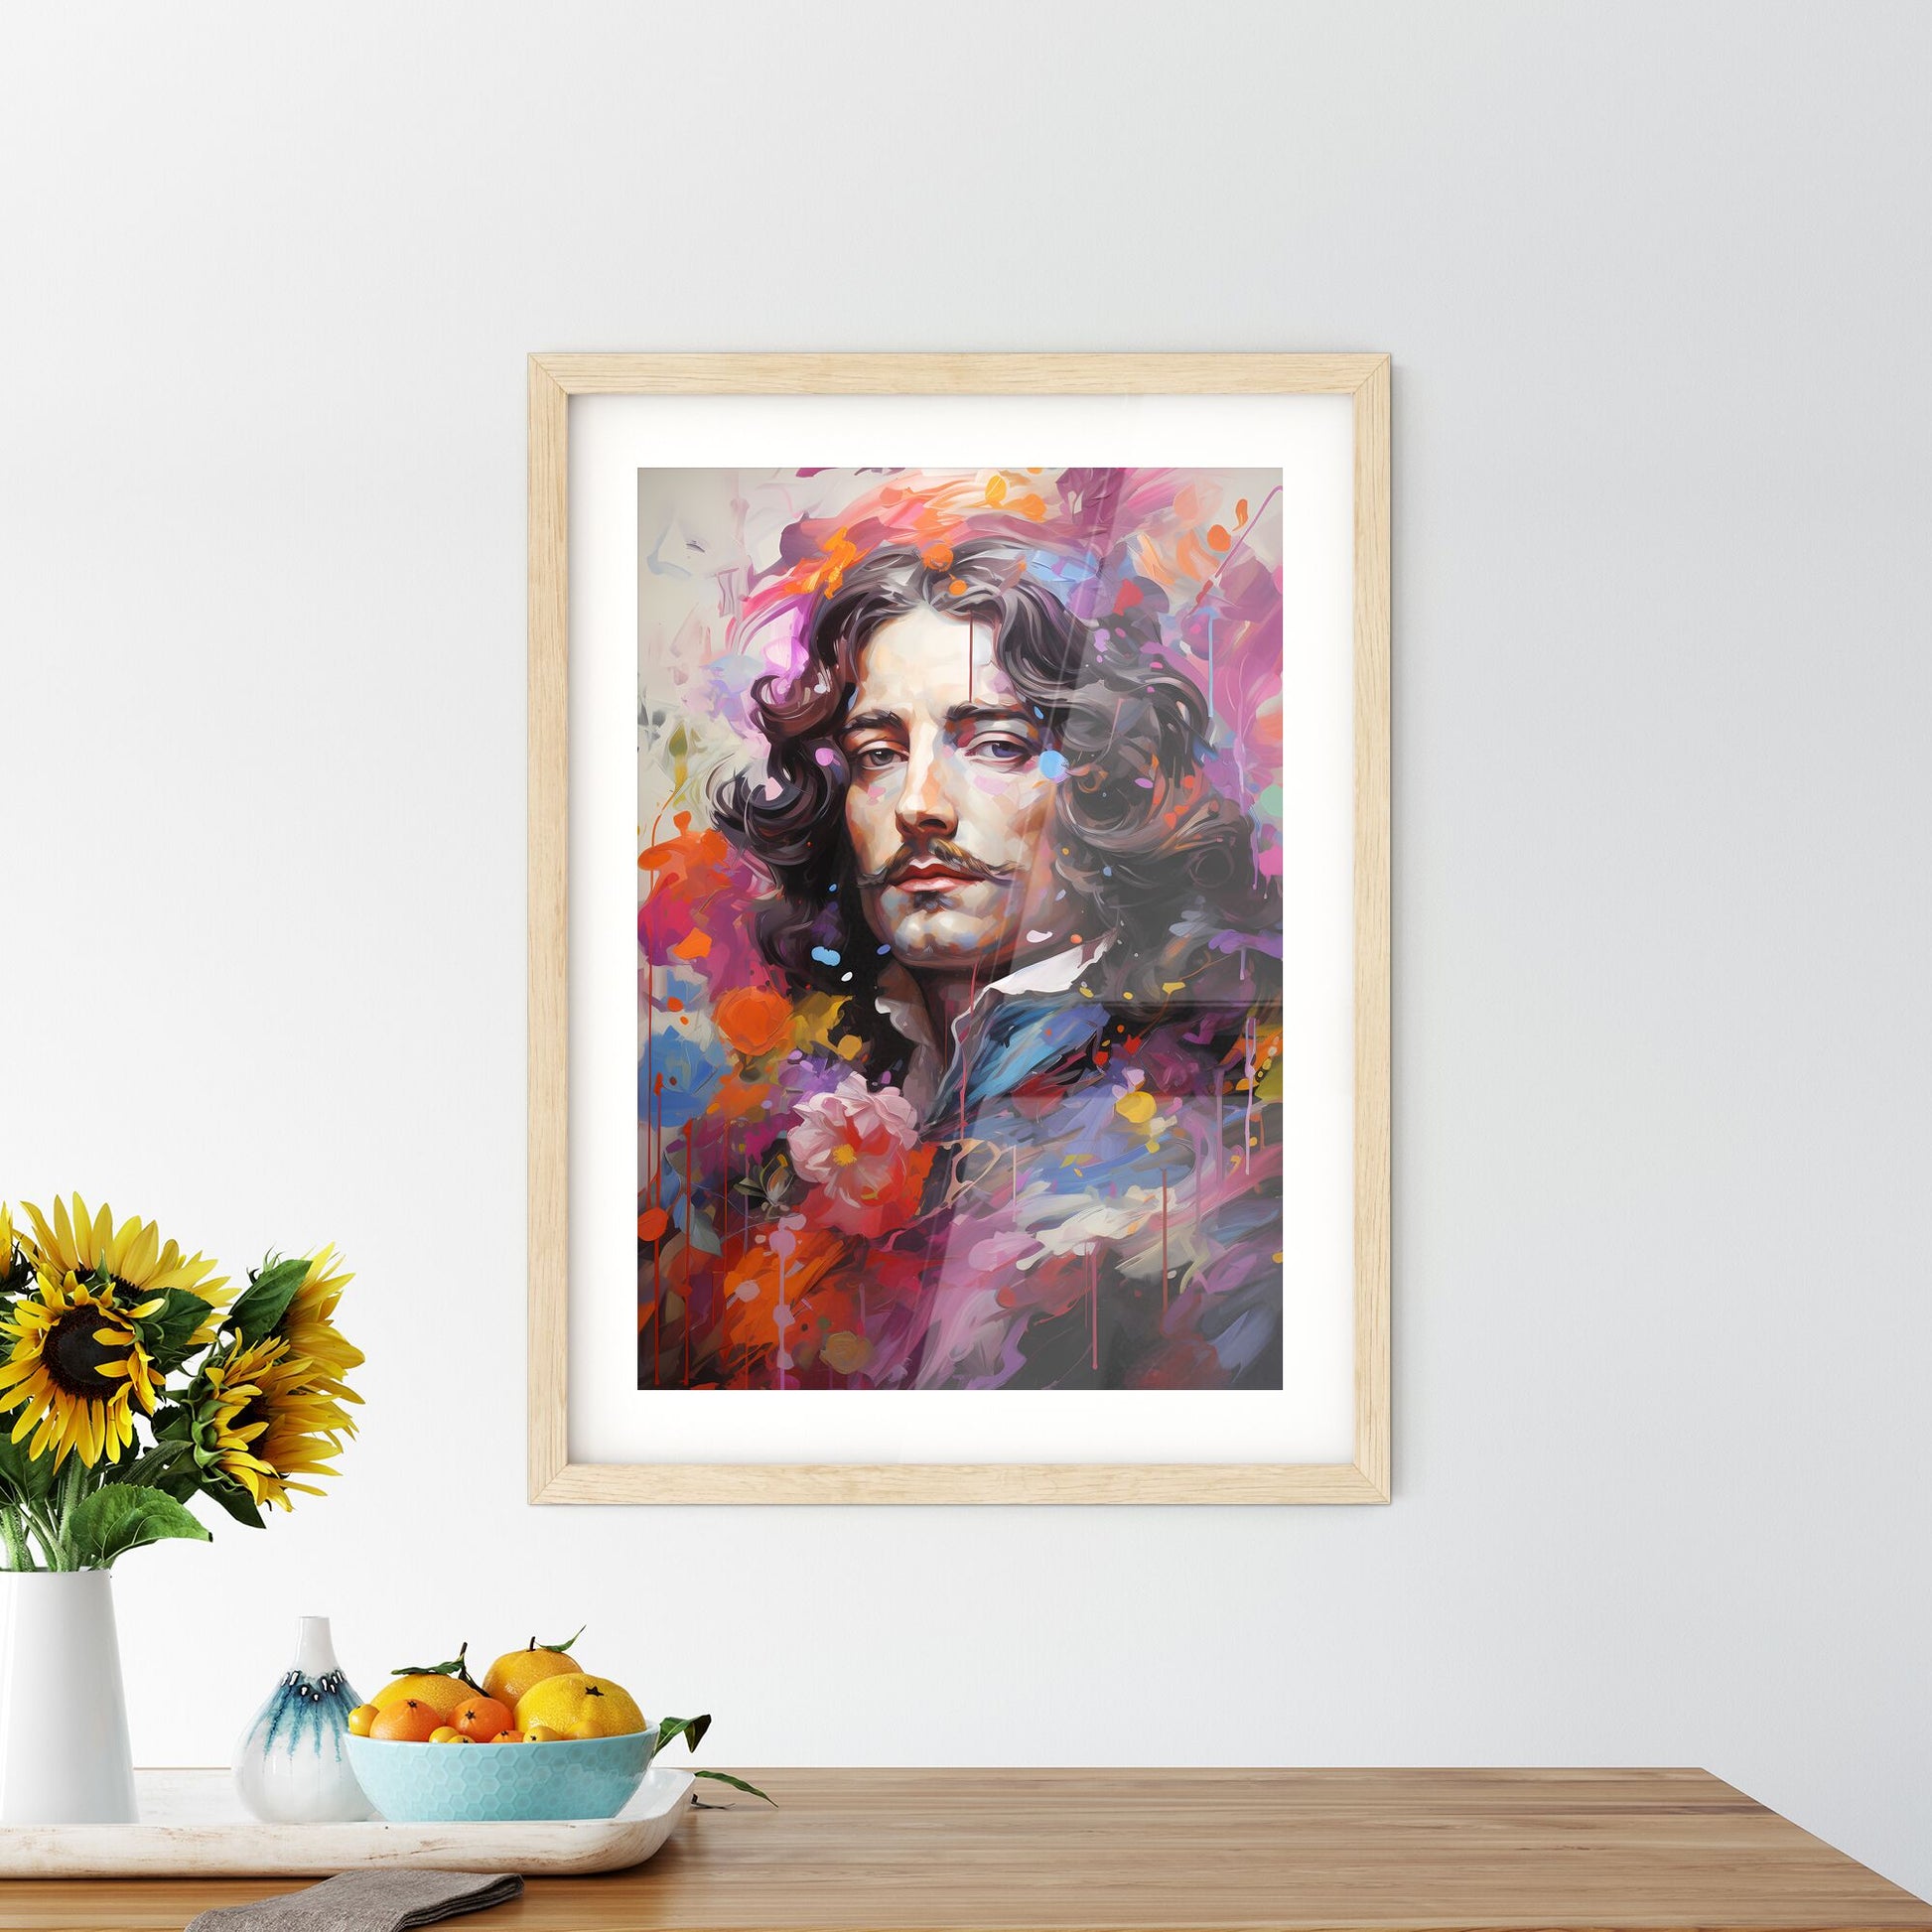 Louis Xiv - A Painting Of A Man With A Flower Default Title